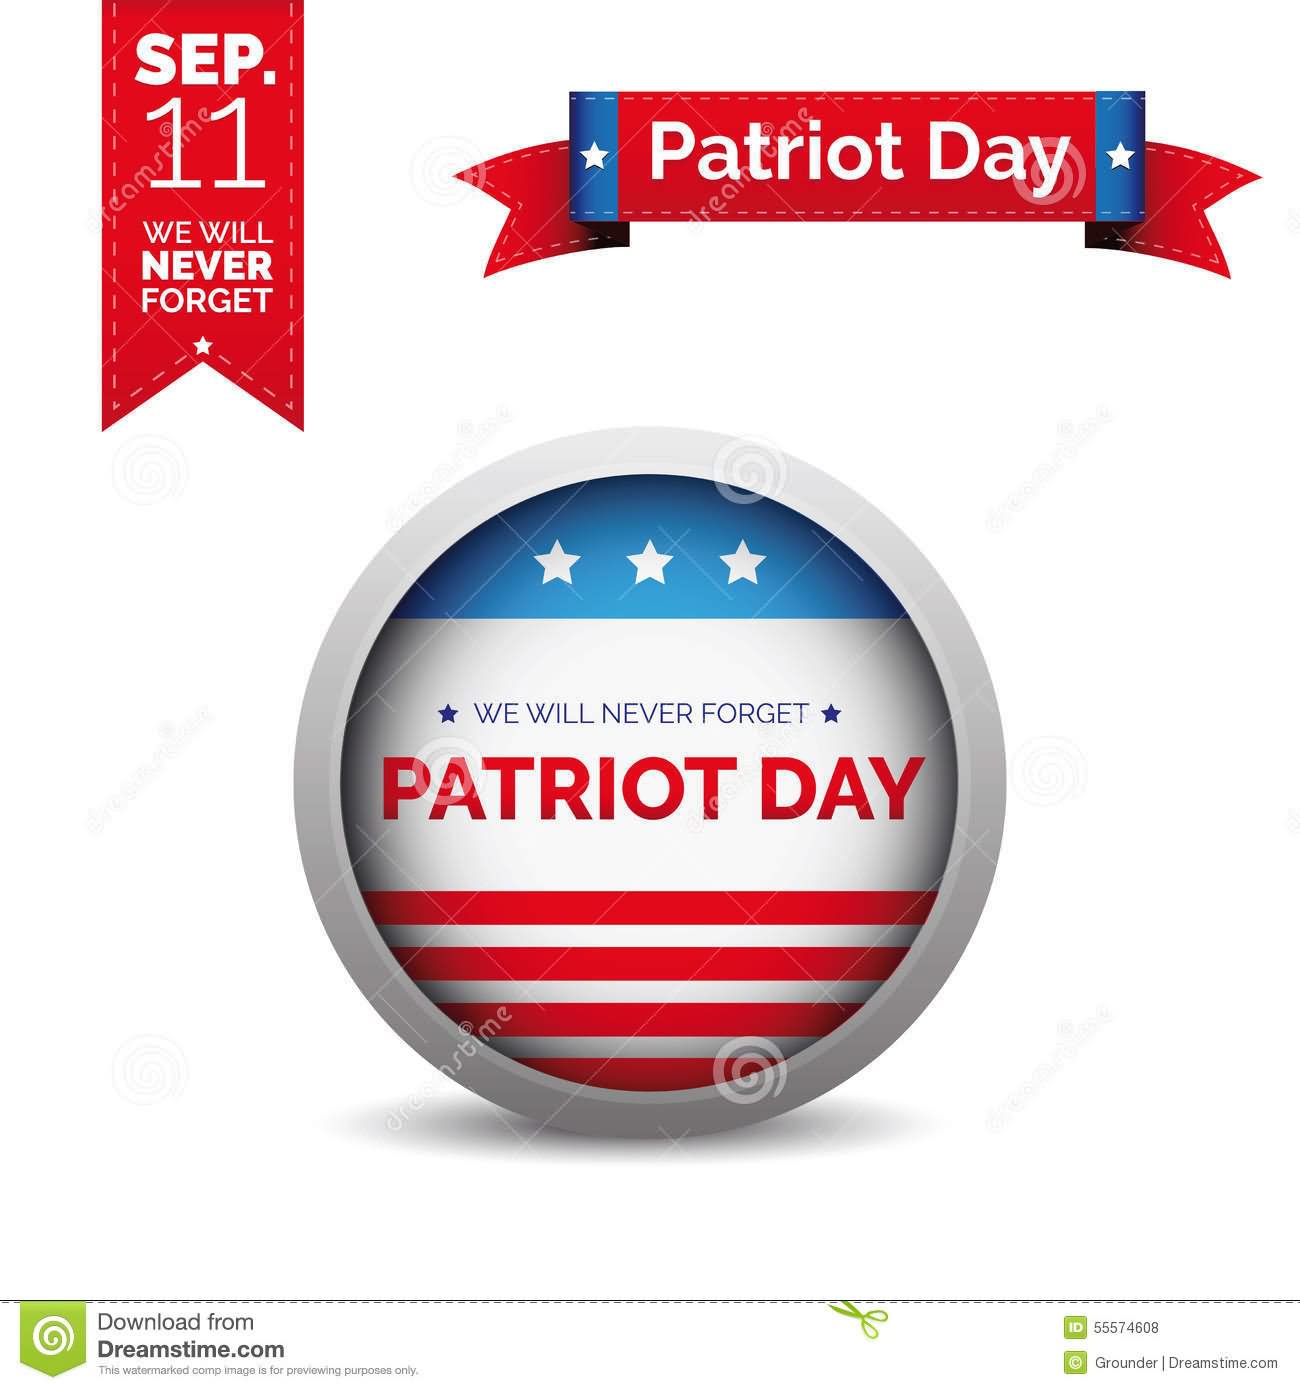 Sep 11 We Will Never Forget Patriot Day